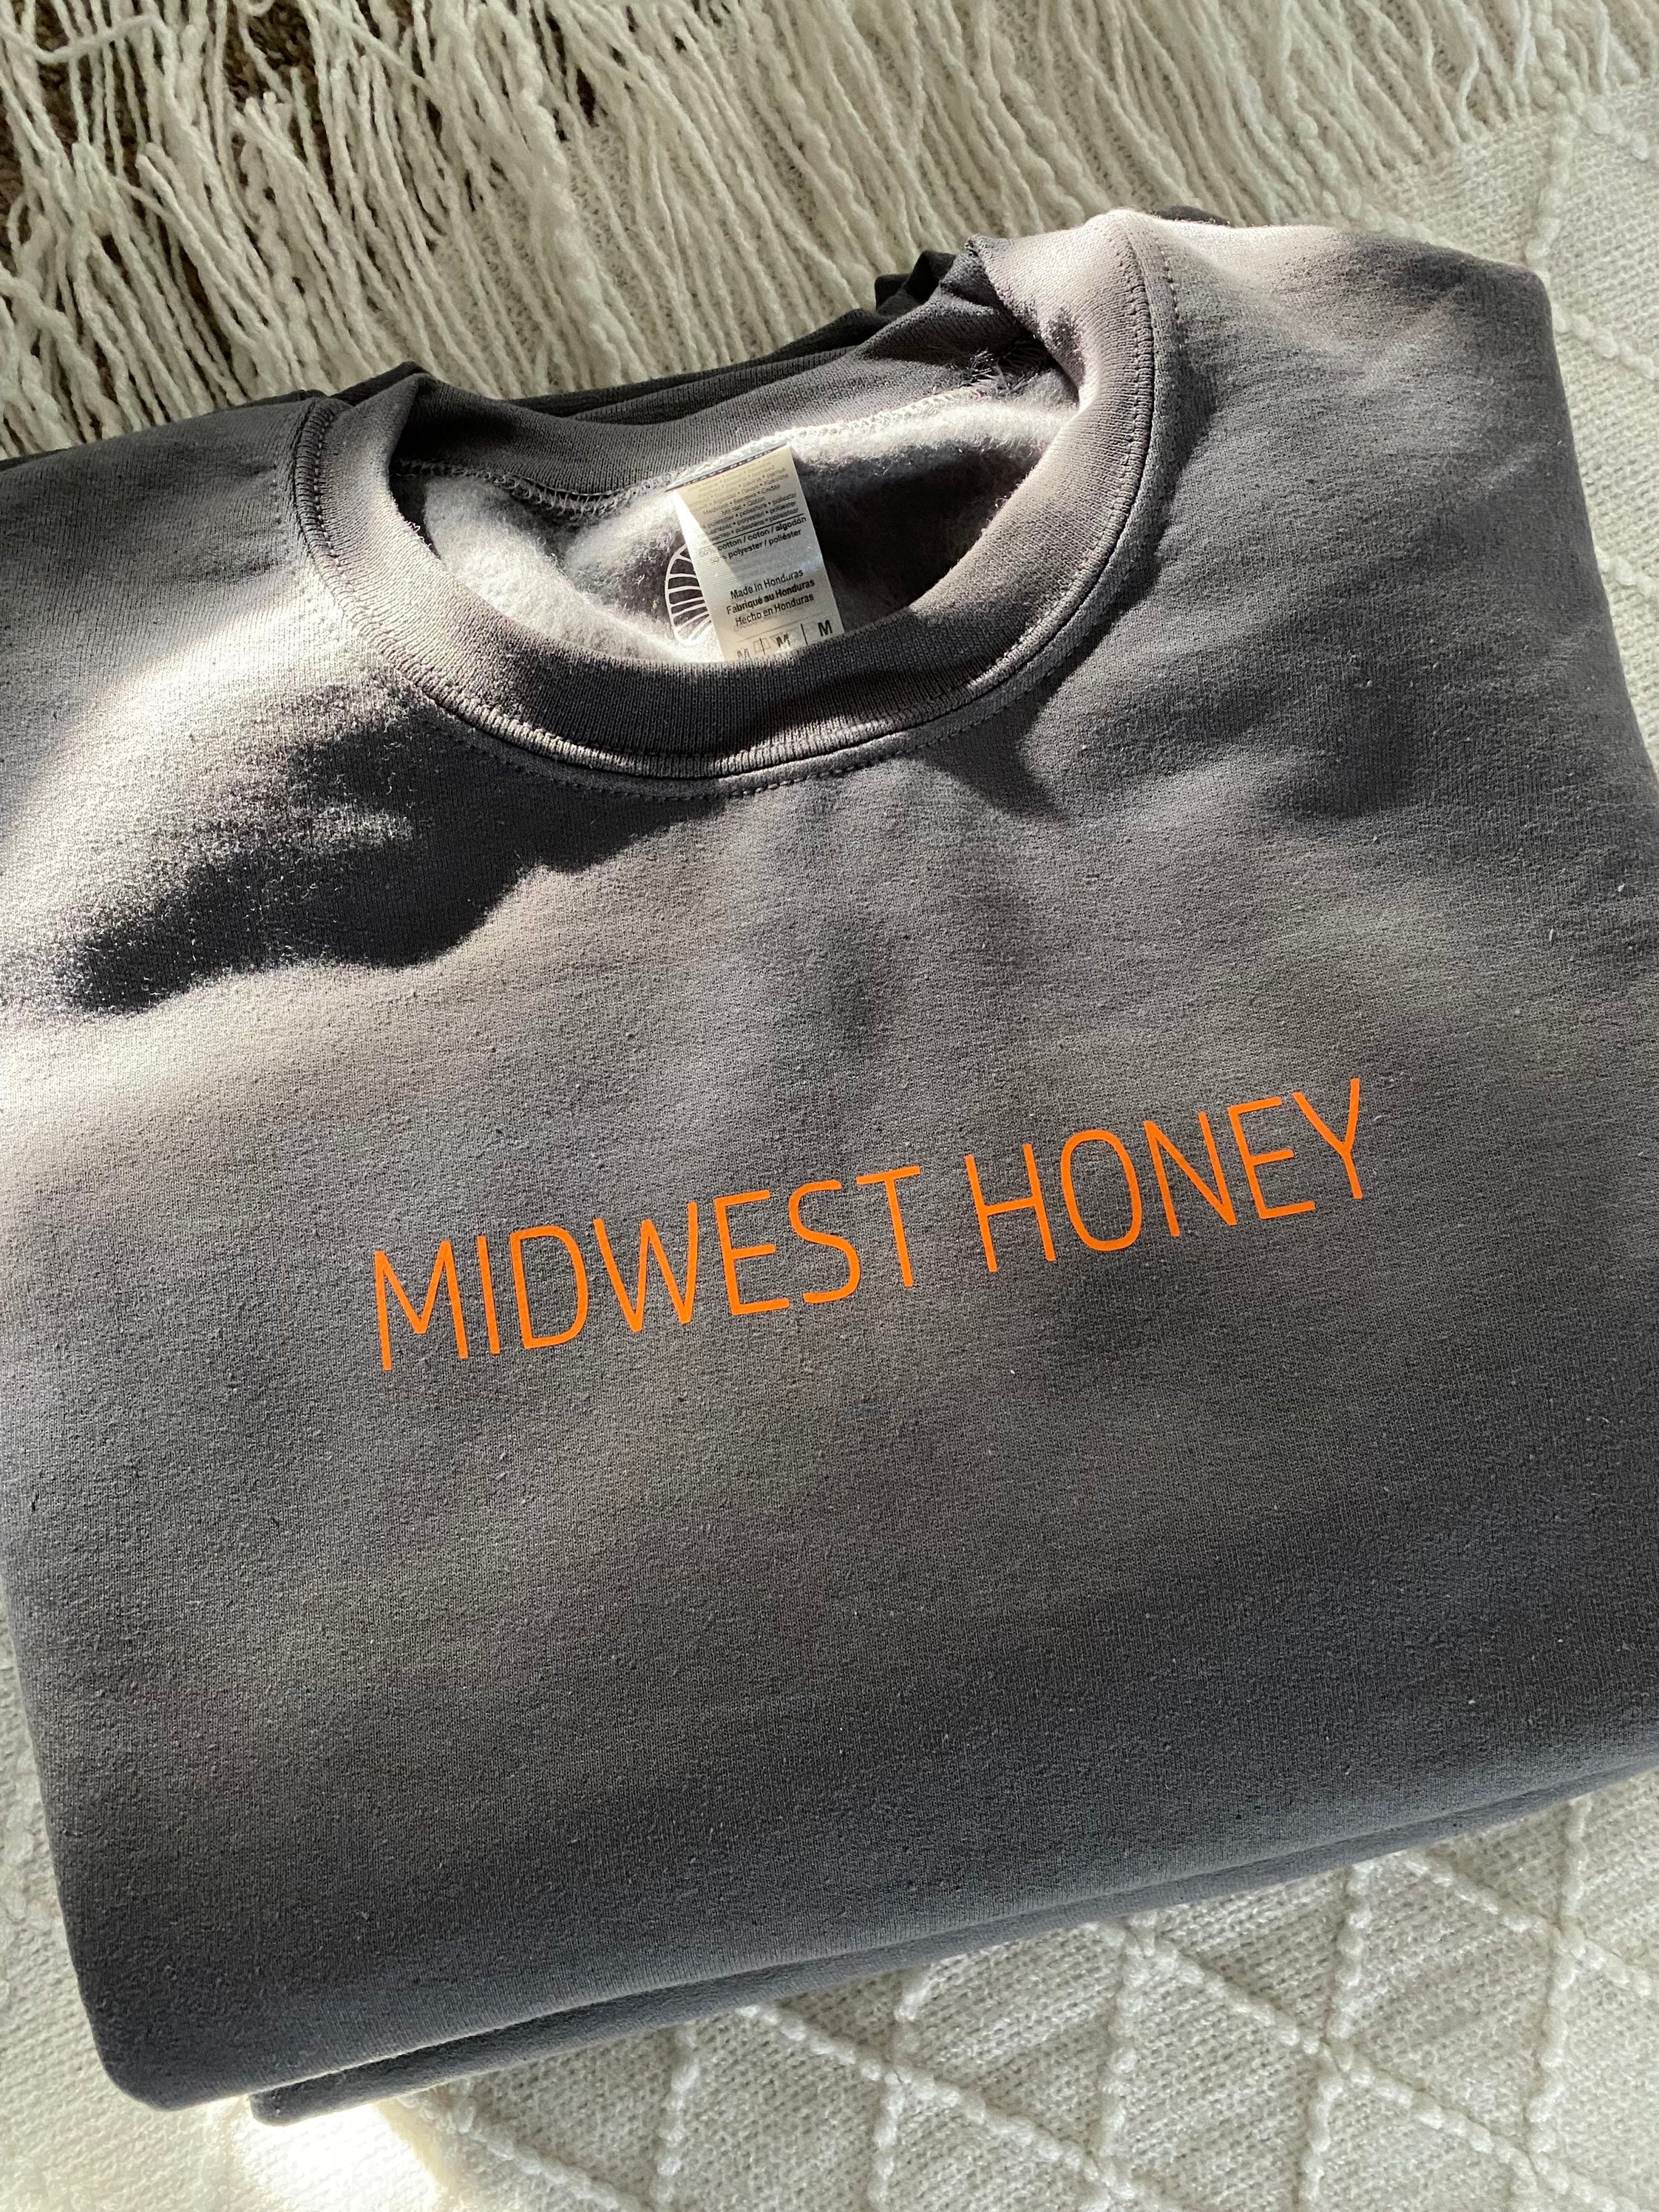 Midwest Honey Crew adults + kids